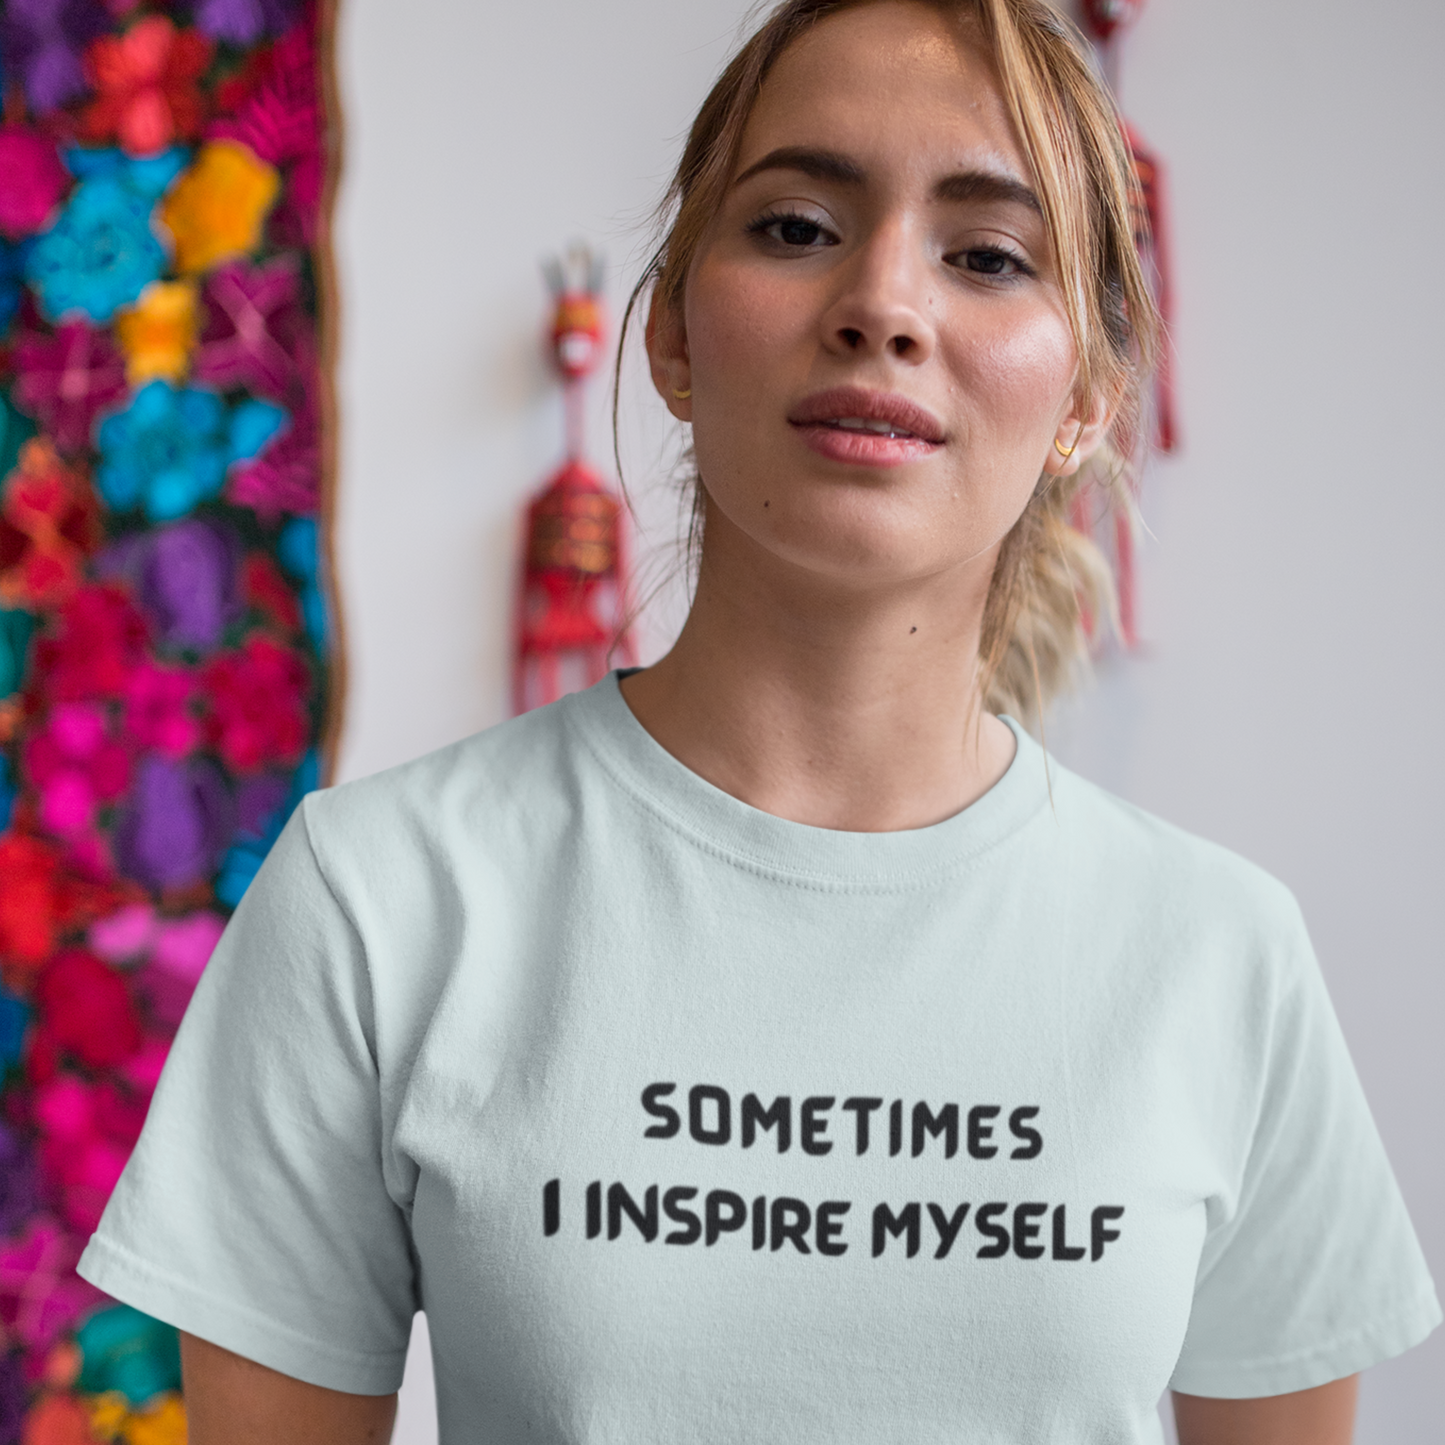 Sometimes I inspire myself unisex t shirt gift, t shirt gift with inspirational words, t shirt gift for friends